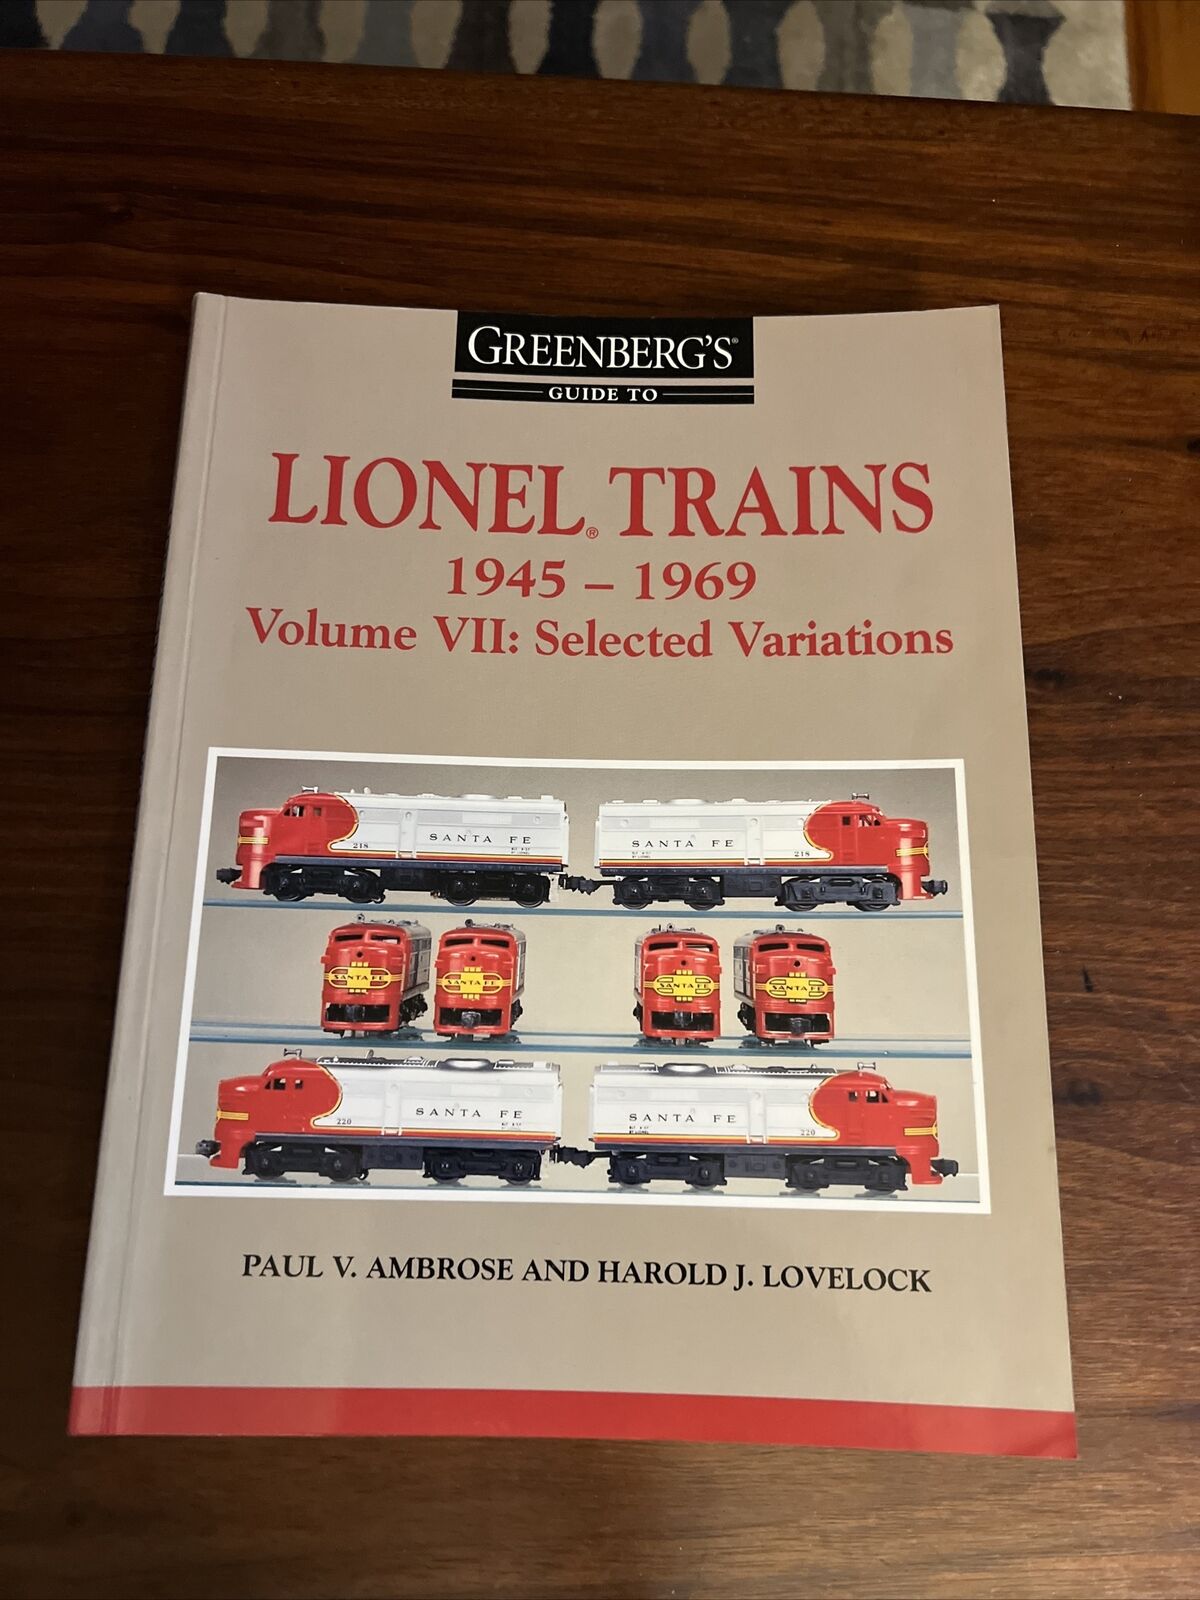 Greenberg\'s Guide to Lionel Trains 1945-1969 Volume VII: Selected Variations